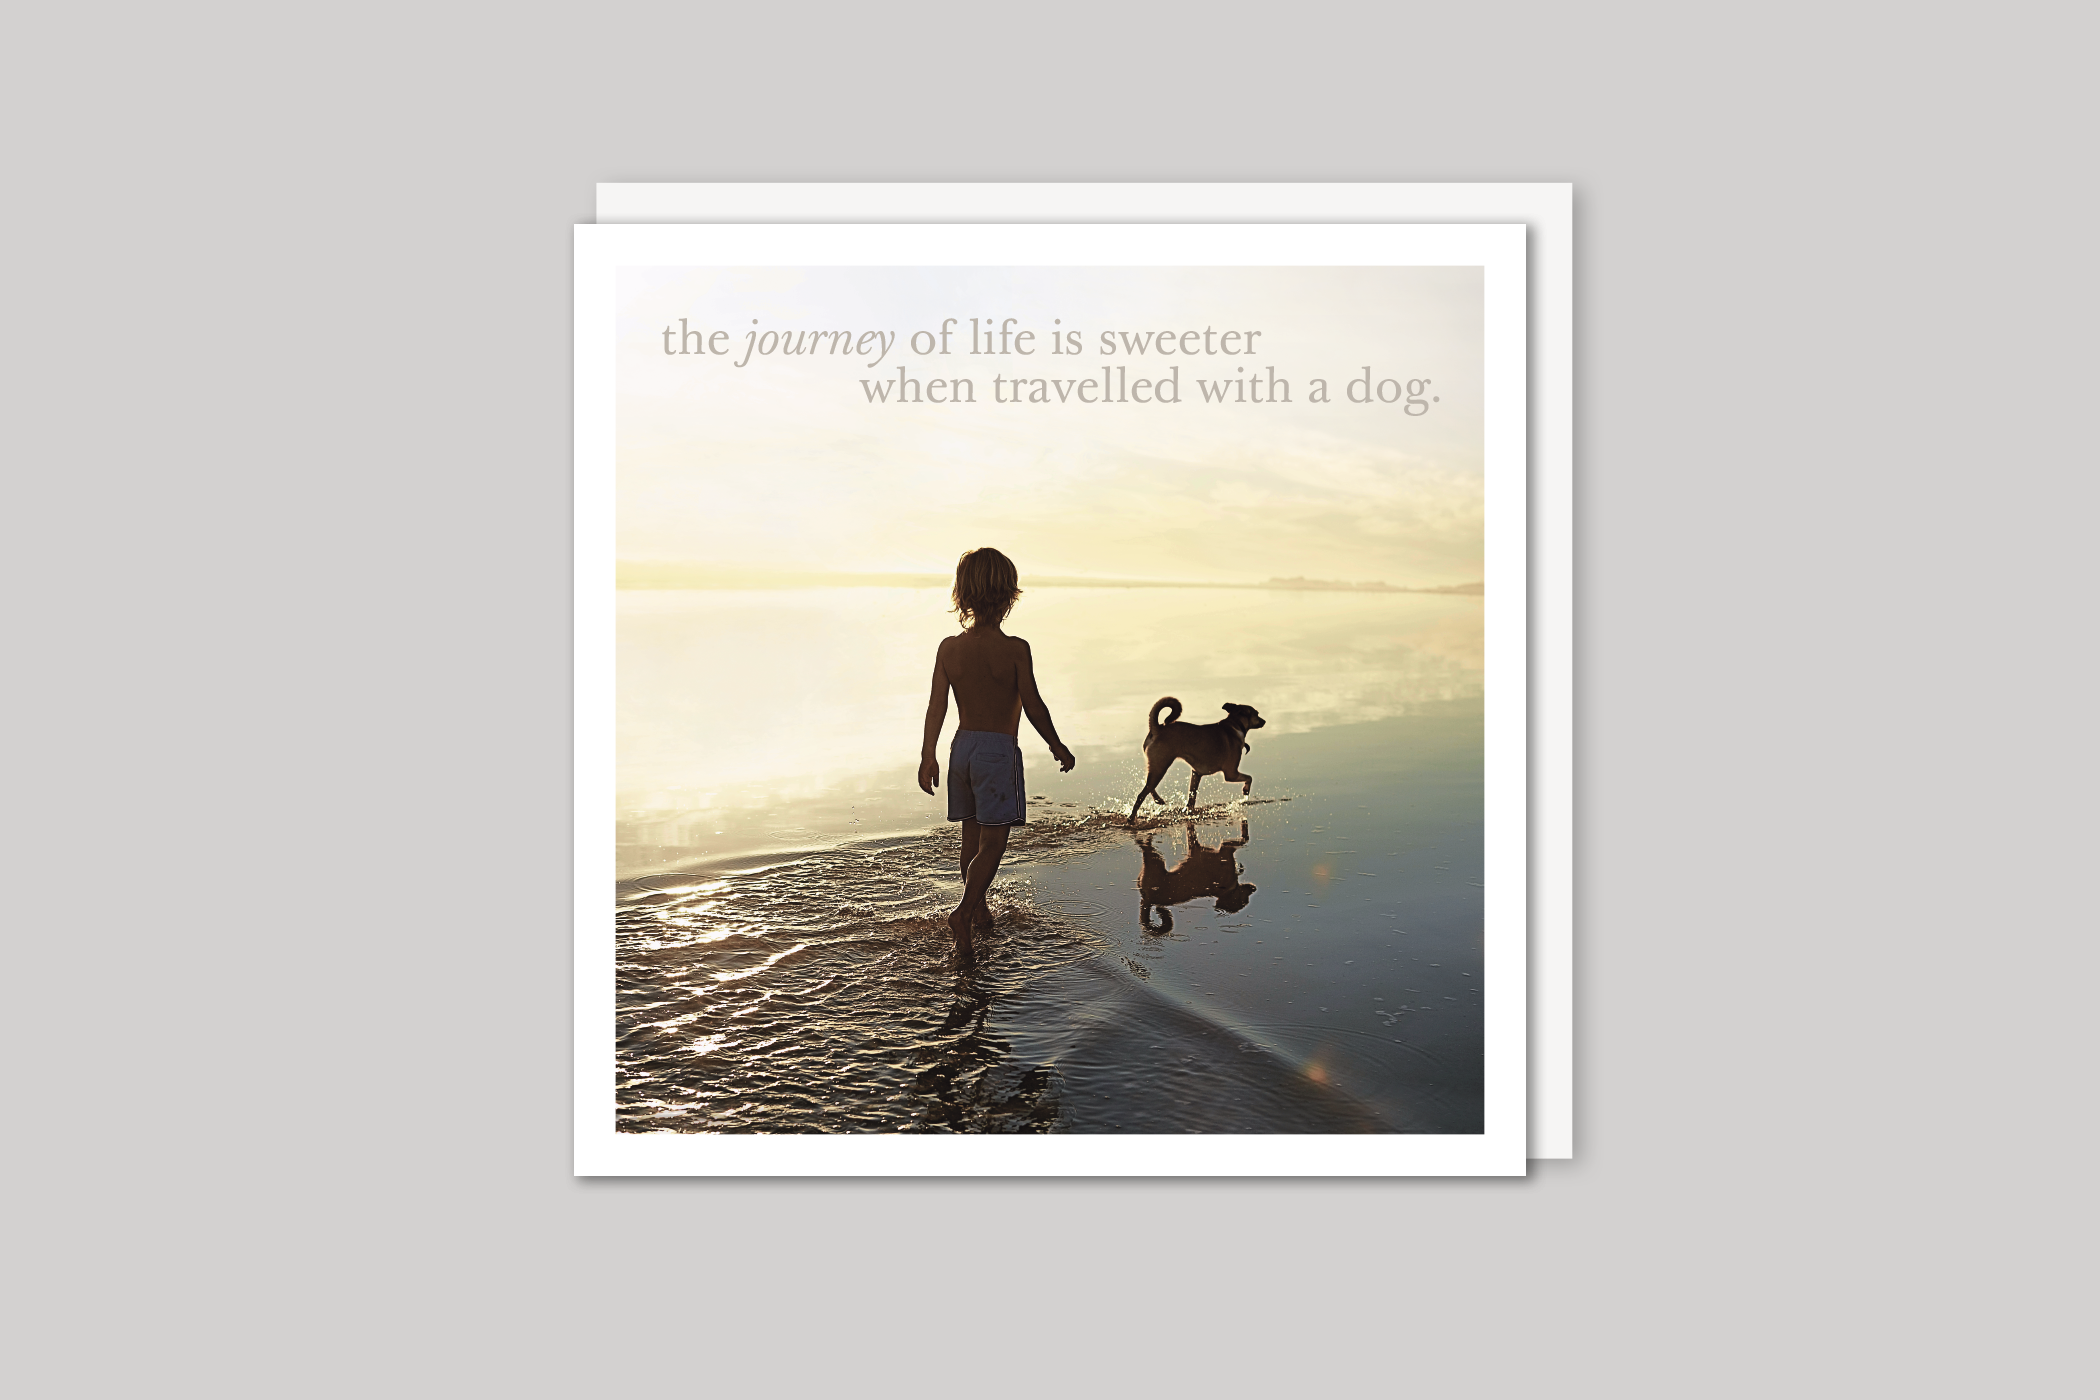 The Journey of Life from Every Picture range of greeting cards  by Icon, back page.